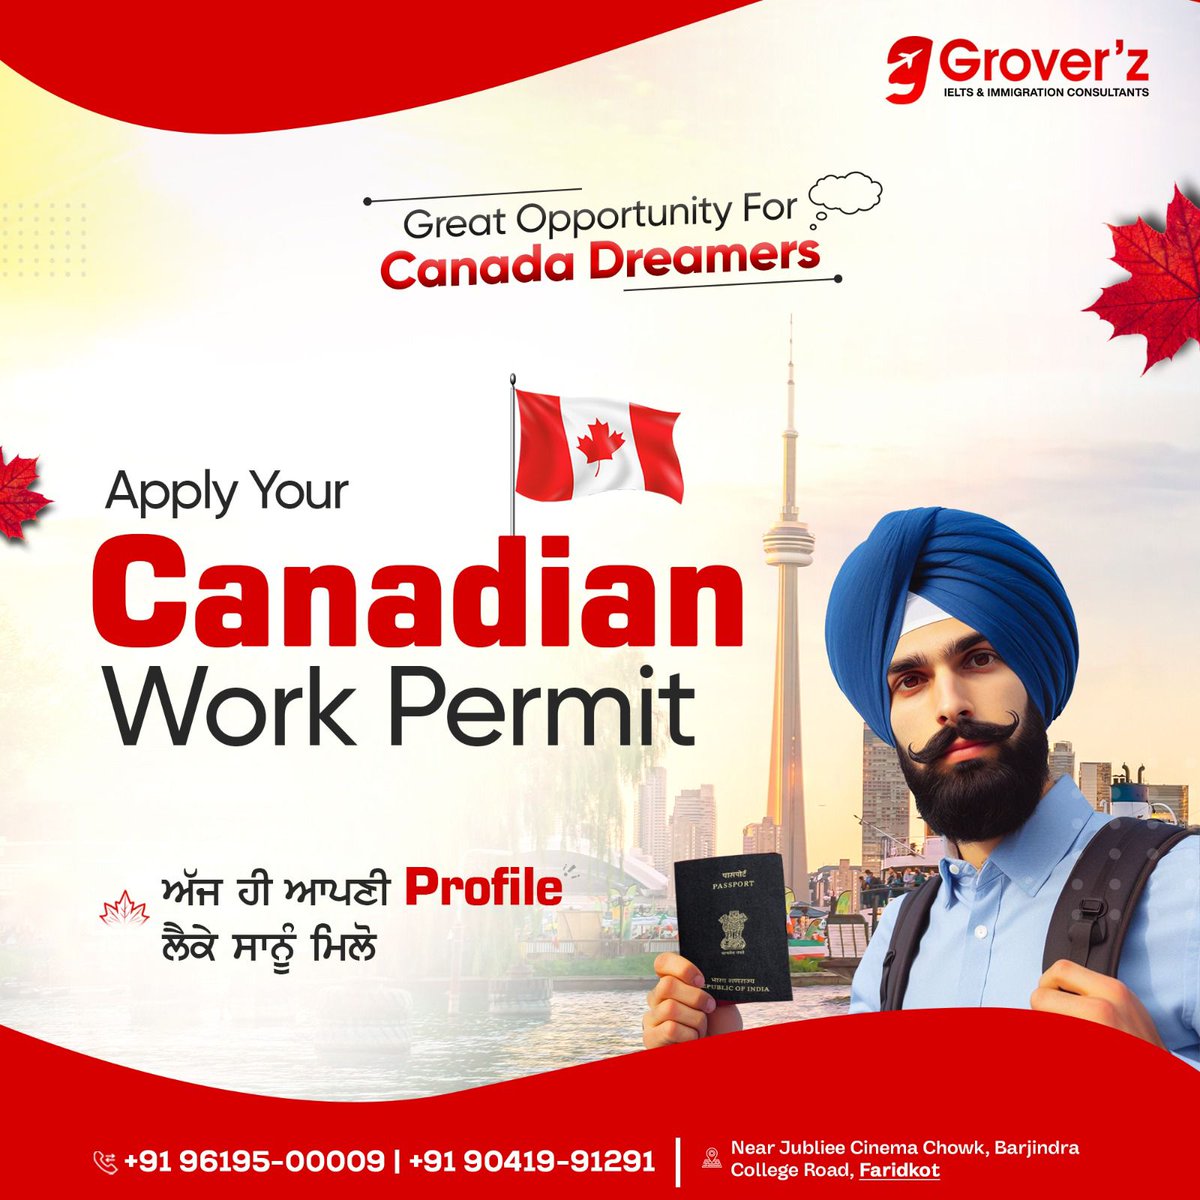 Live, work, and explore Canada!🇨🇦 Get expert guidance on your work permit application.🍁✅ Contact us now to apply!⤵ ☎ 96195-00009, 90419-91291 Visit us: groverz.in #GroverzIeltsImmigration #Canada #WorkPermit #Workincanada #settleincanada #CanadaWorkpermit